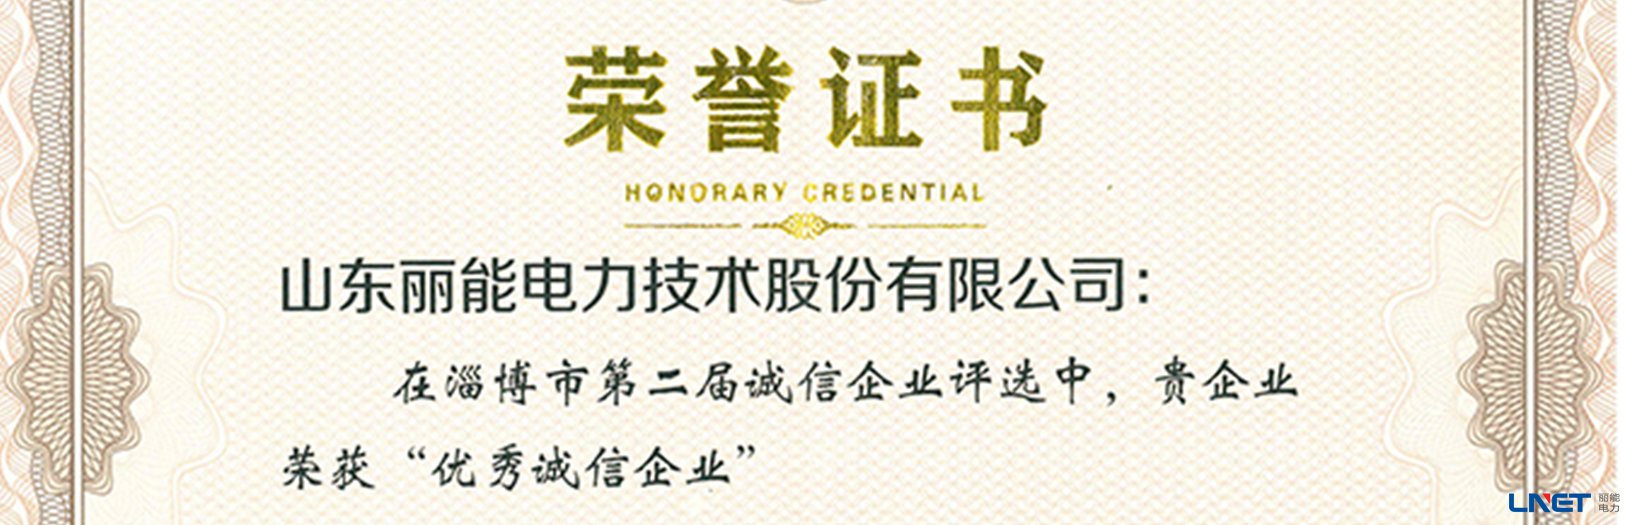 Congratulations! LNET was Awarded the Honorary Title of Zibo